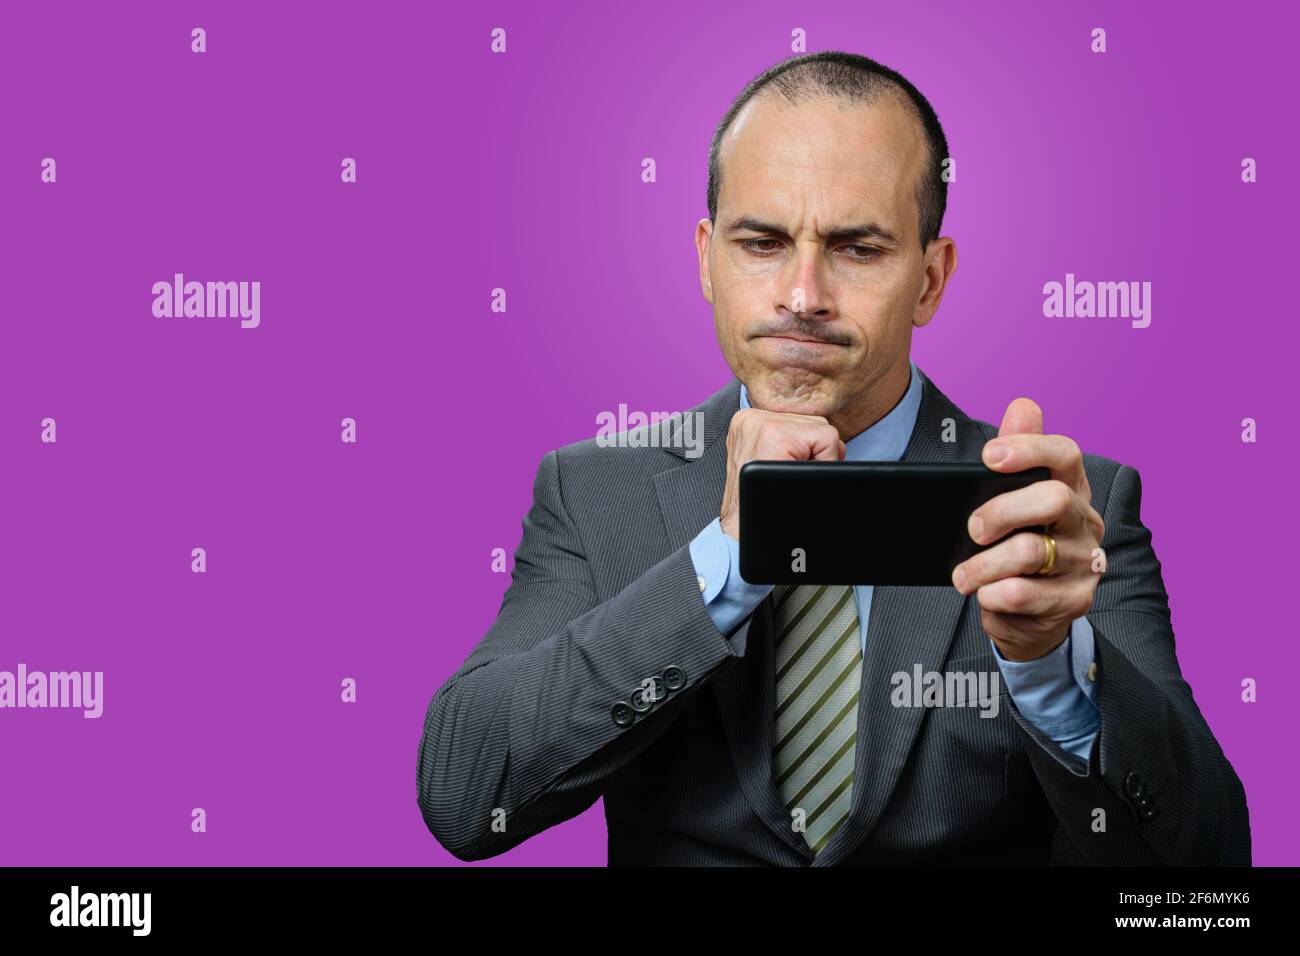 Mature man with suit and tie, looking at his smartphone, disappointed and with his fist under chin. Purple background. Stock Photo